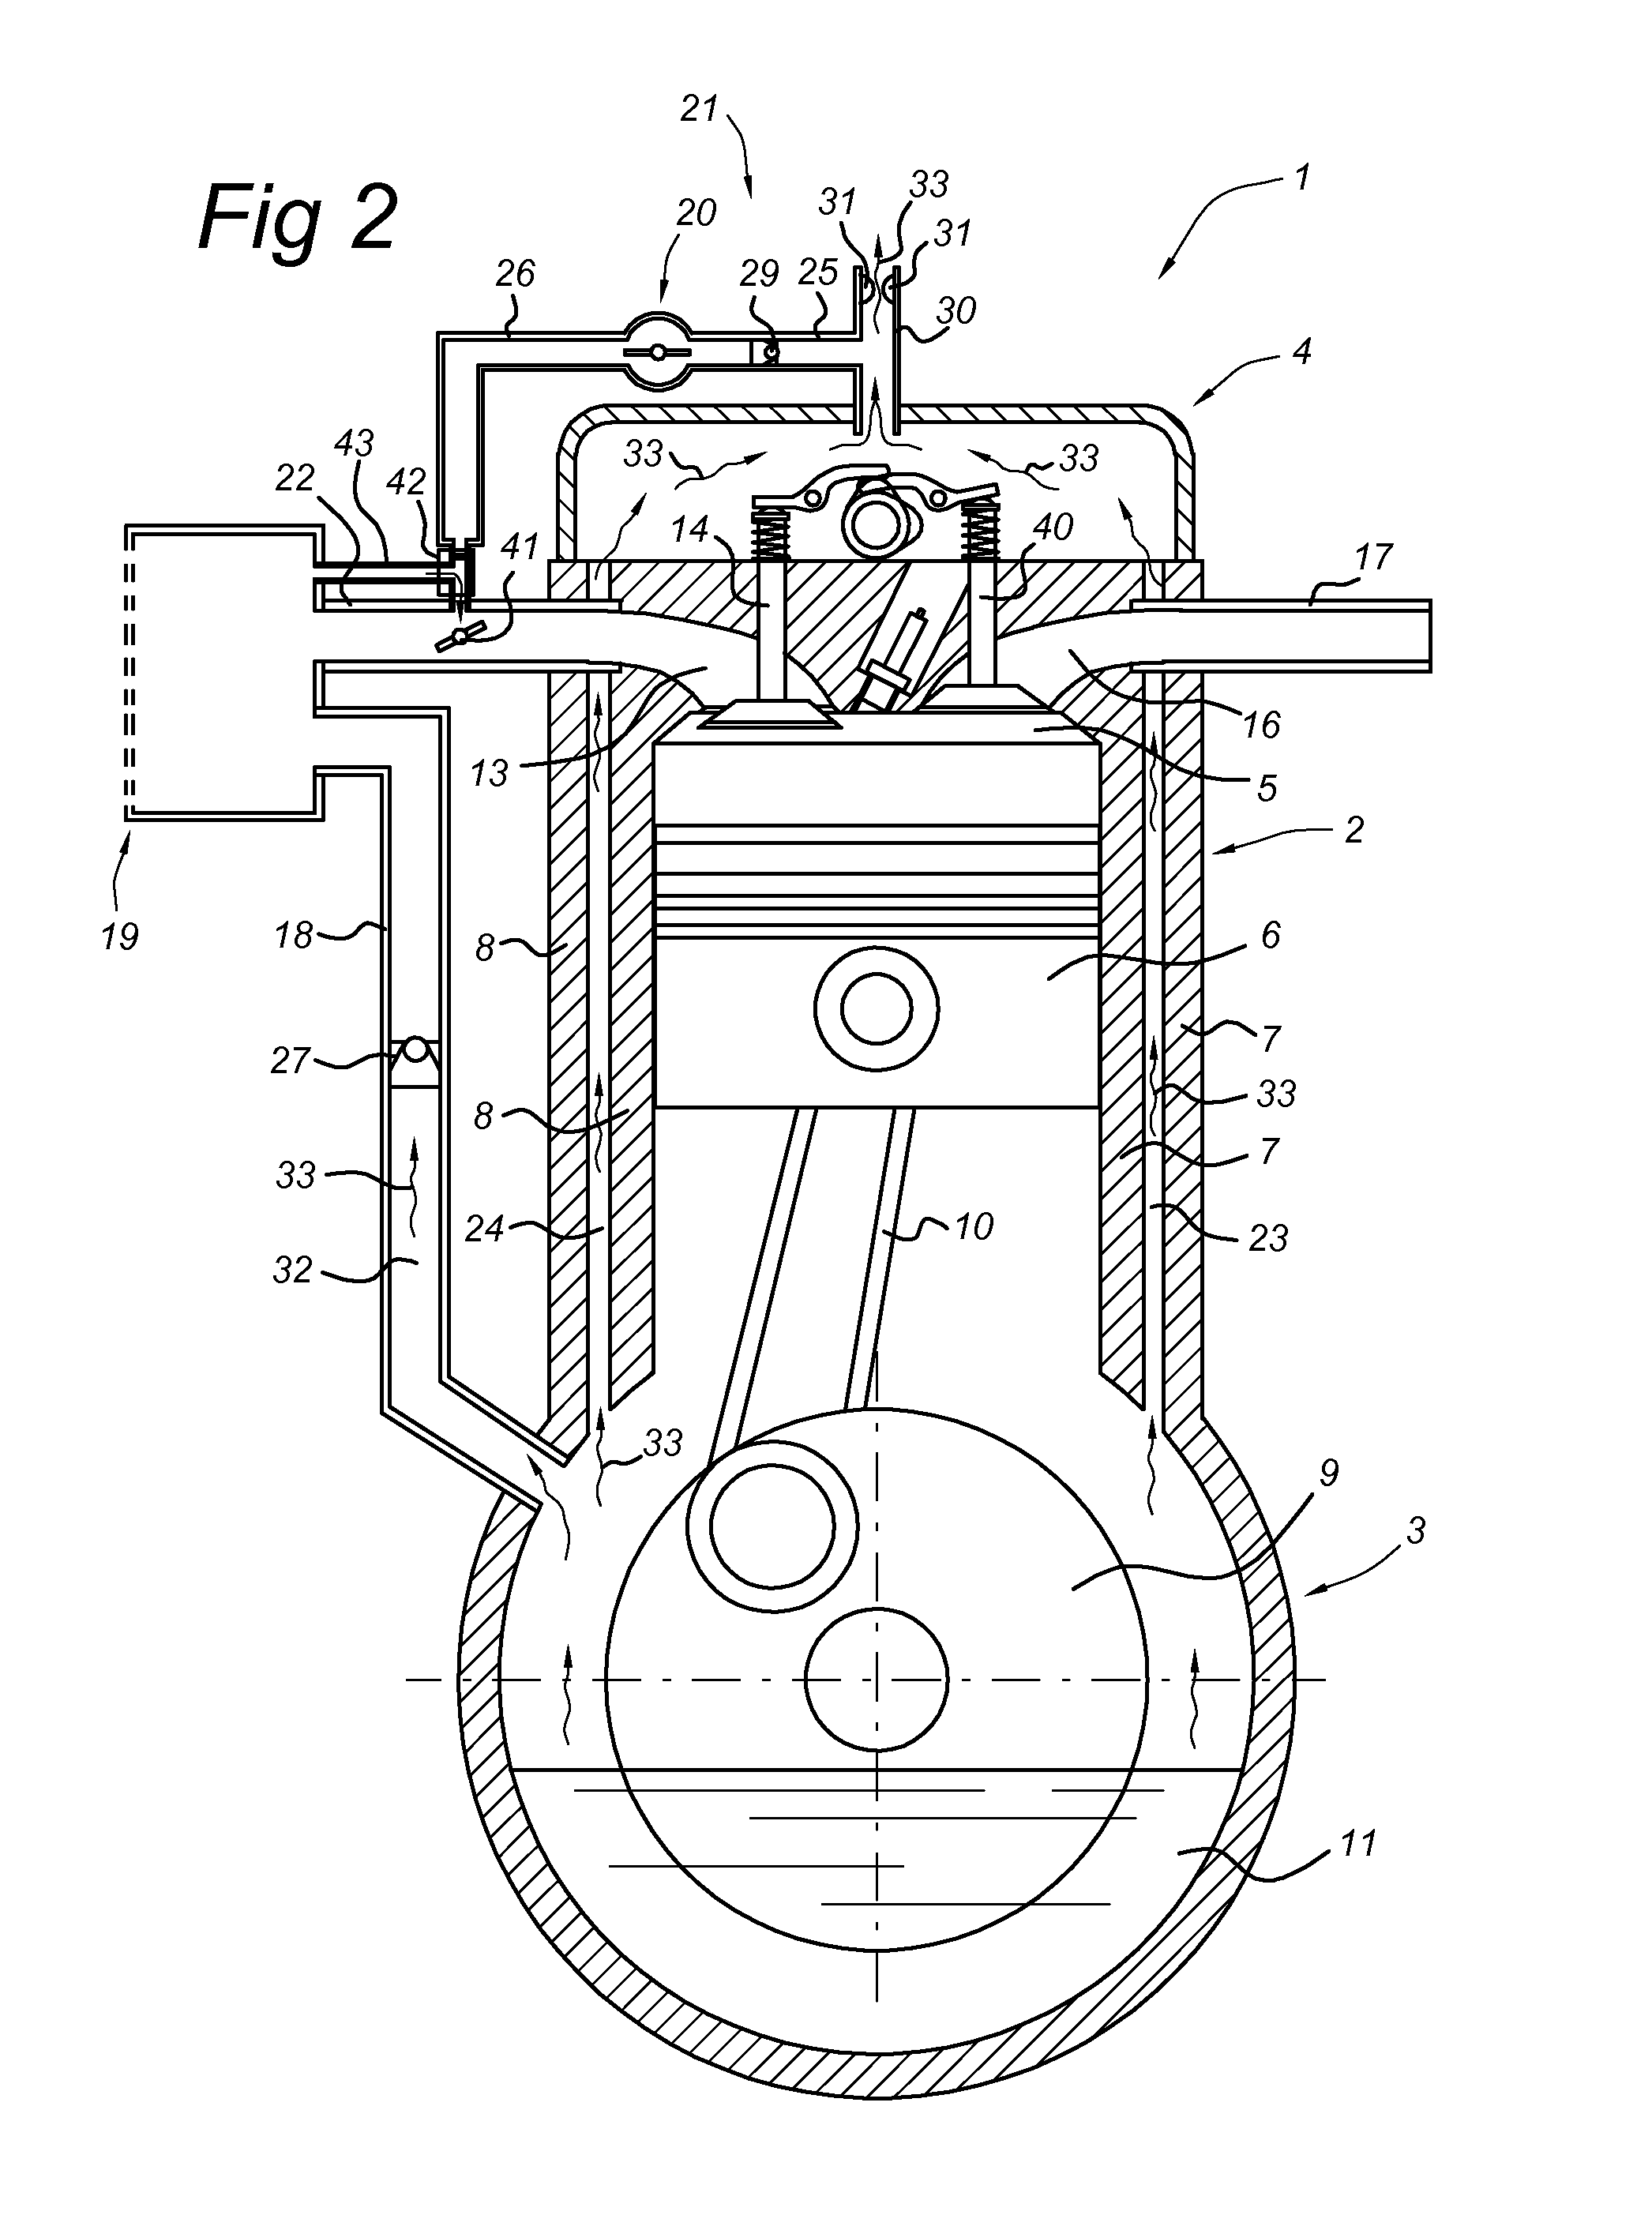 Assembly for use in a crankcase ventilation system, a crankcase ventilation system comprising such an assembly, and a method for installing such an assembly